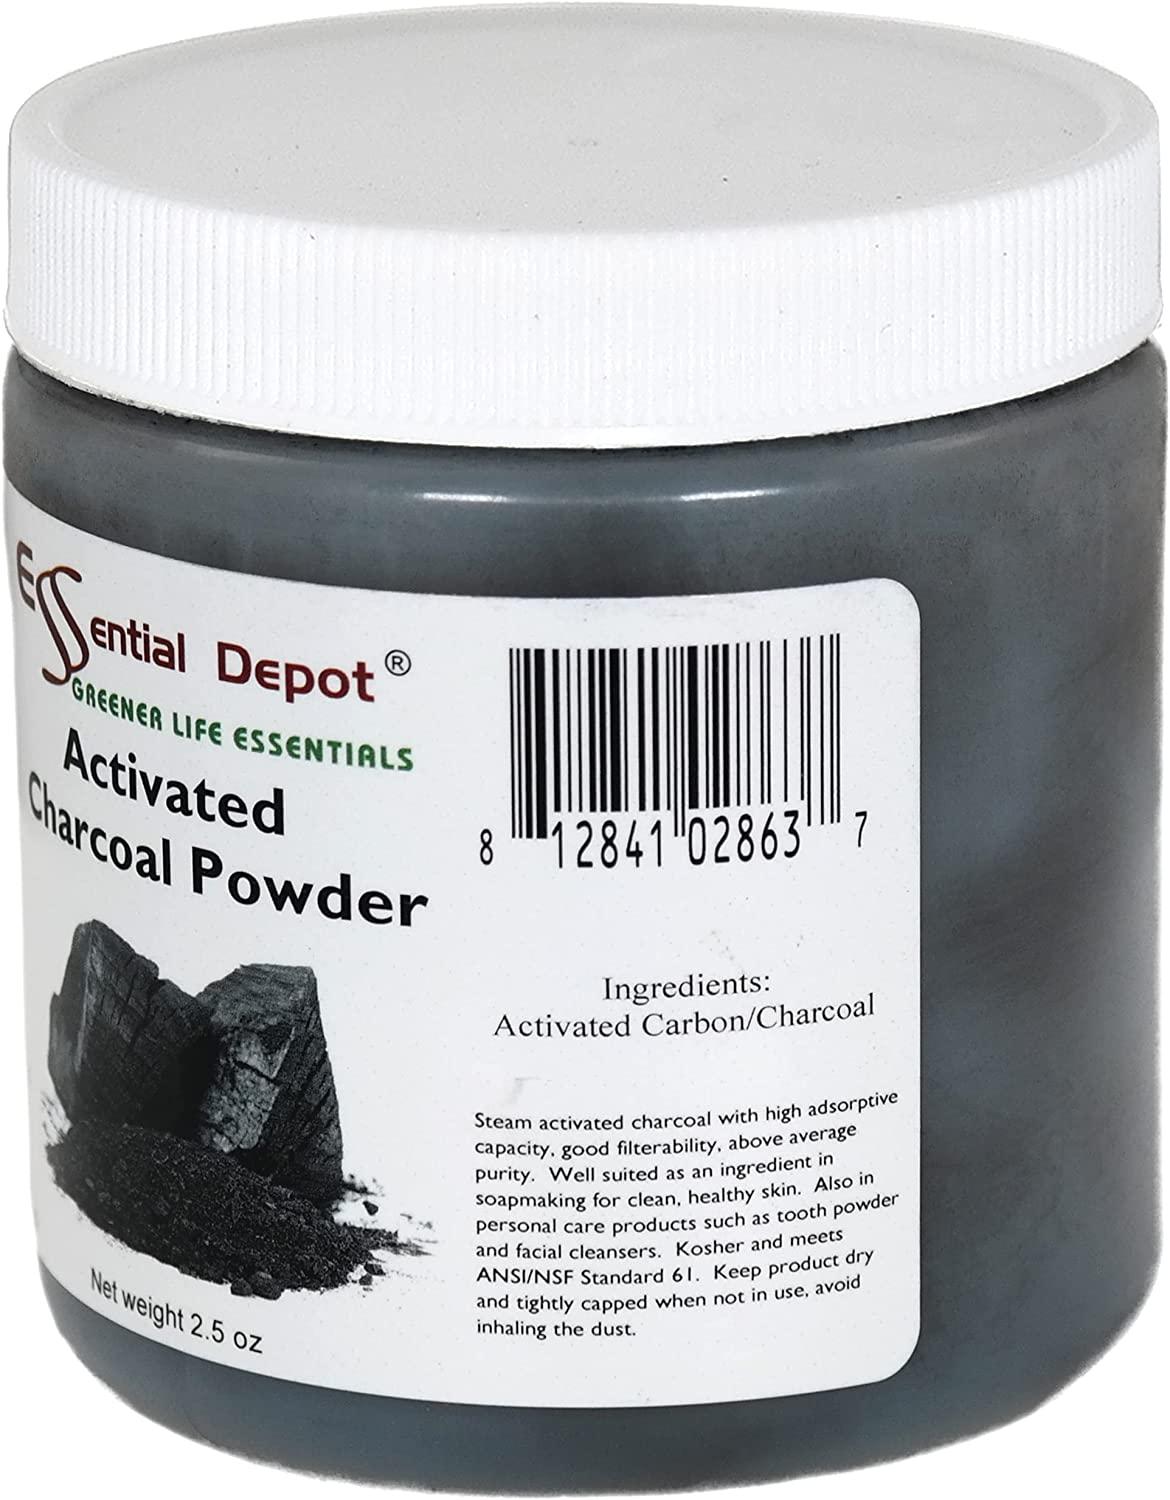 Activated Charcoal Powder - 2.5 oz